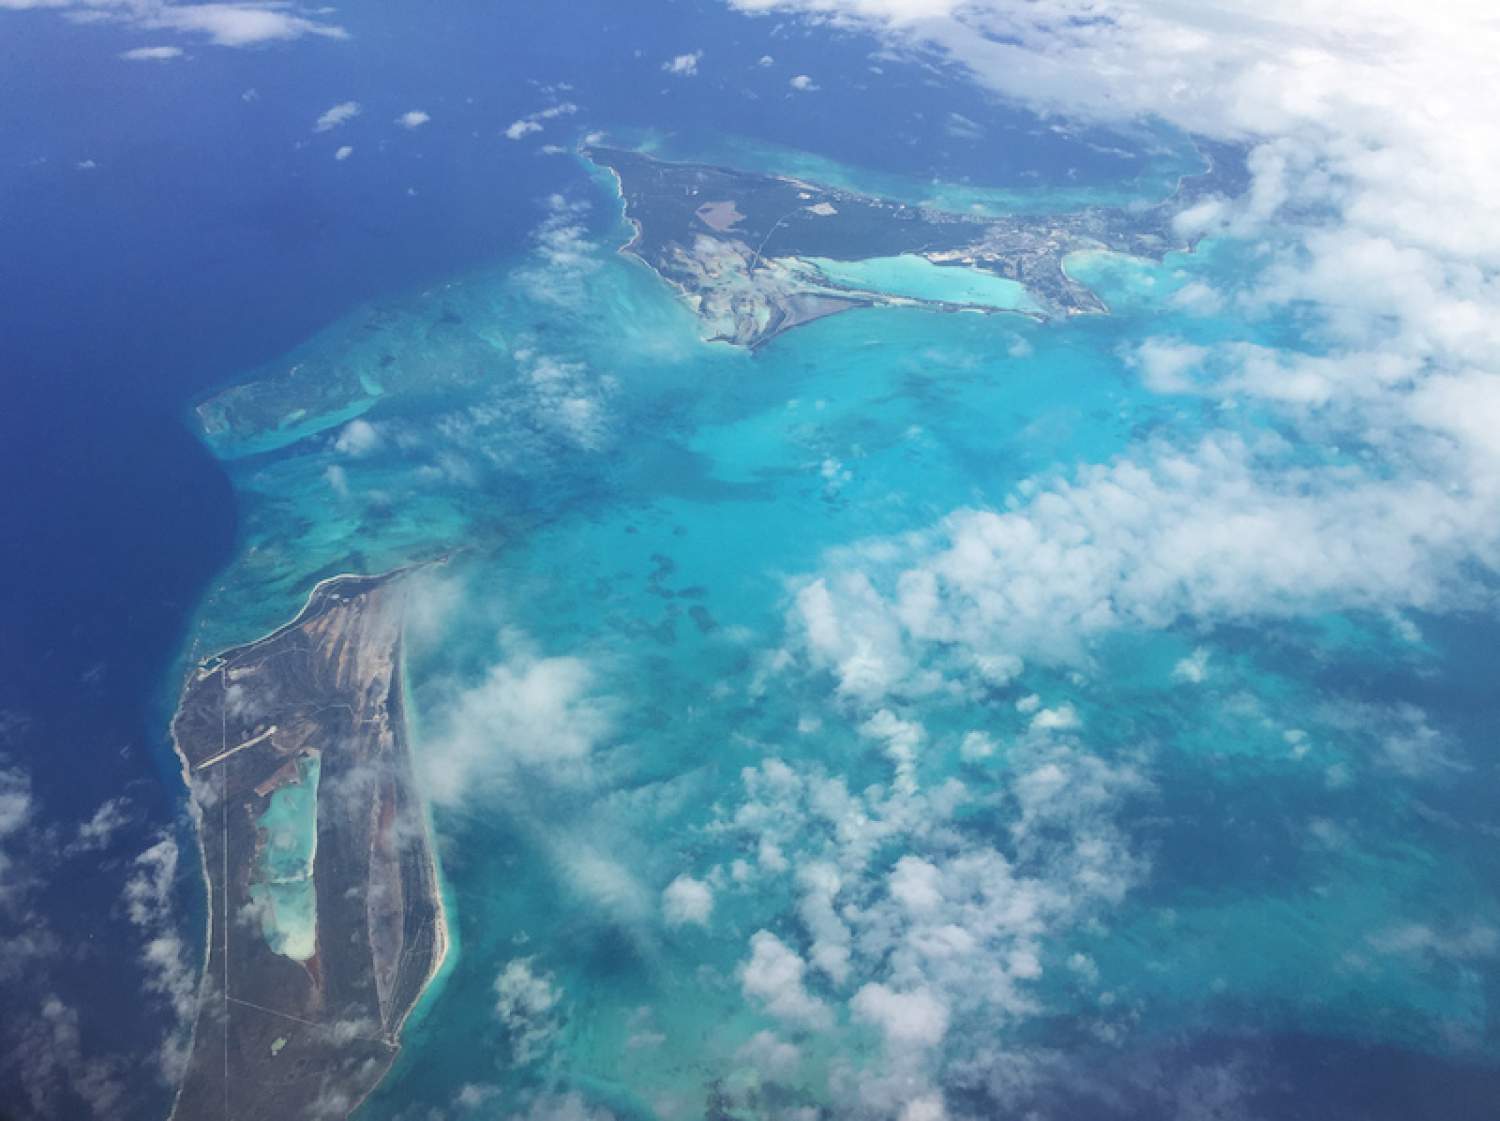 View from the plane of islands in the Caribbean